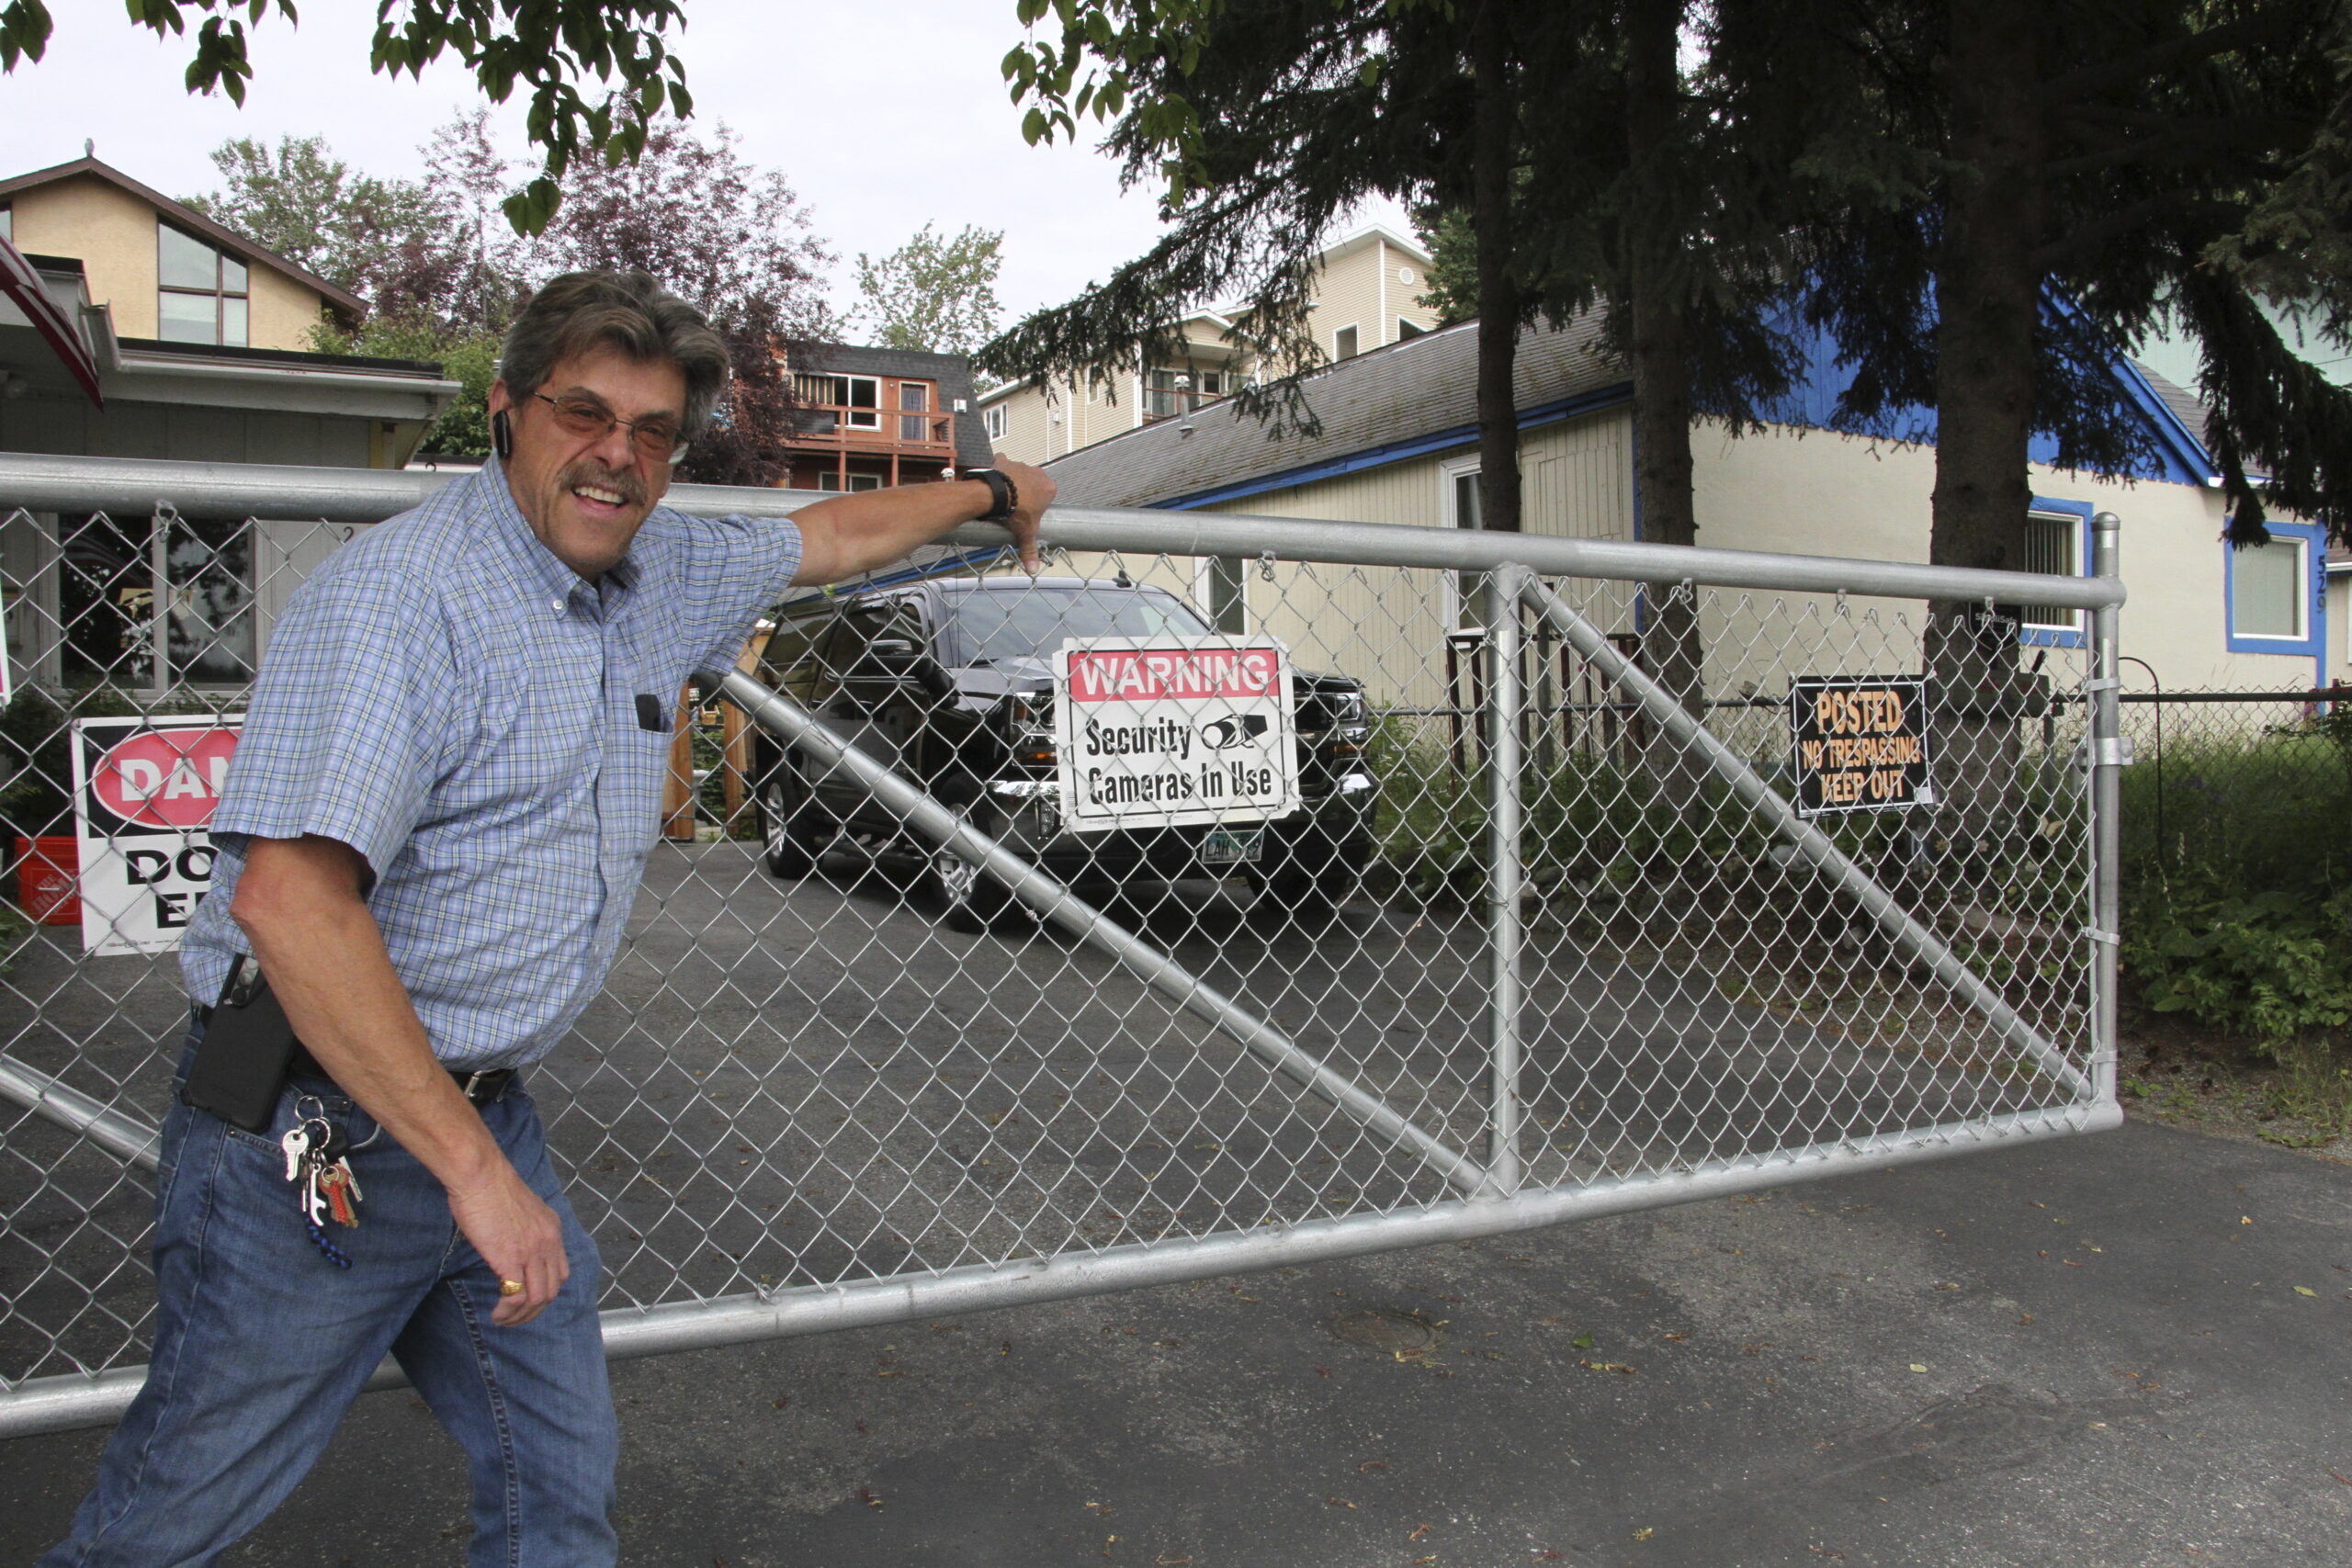 a man poses for a photo next to a gate with a sign that says warning, security cameras in use